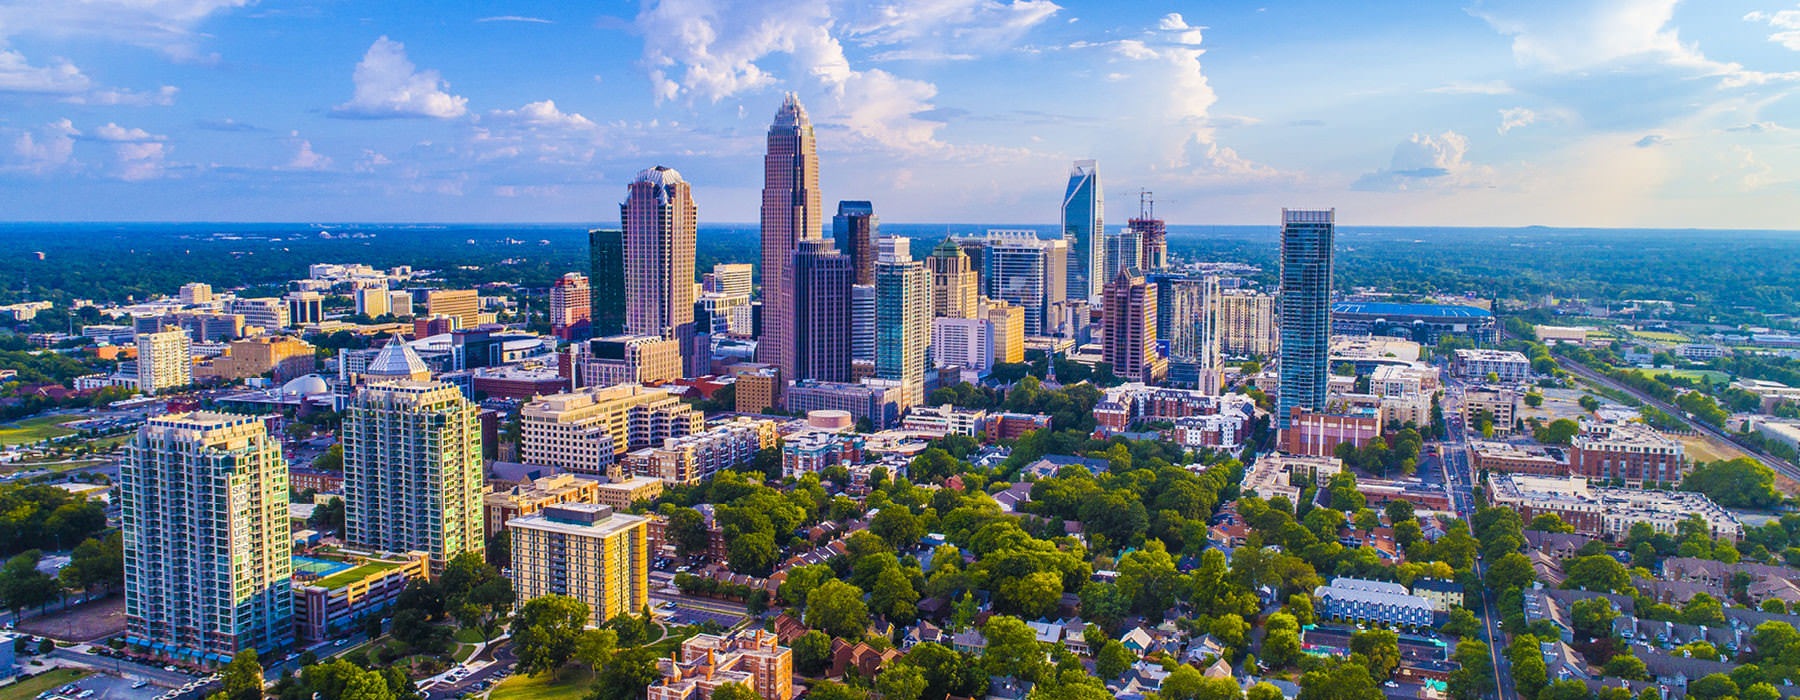 aerial view of downtown Charlotte, NC